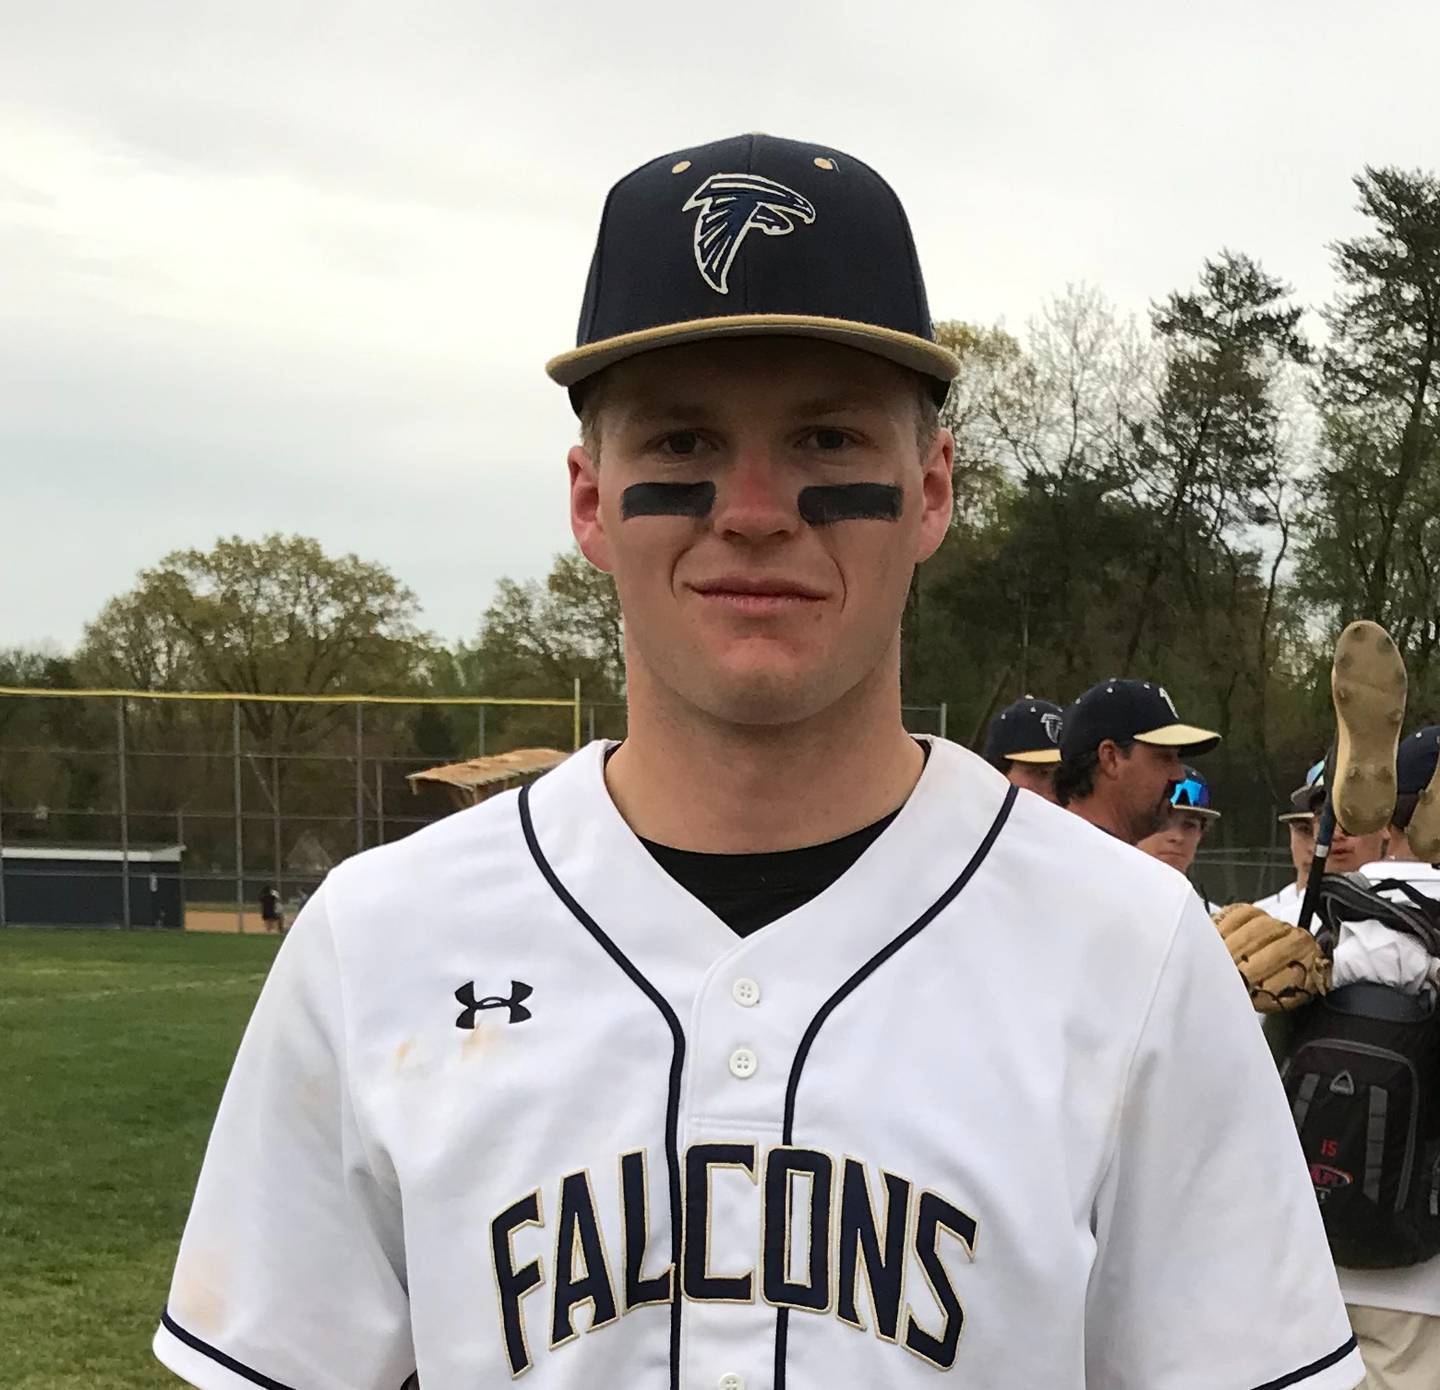 Matt Fleisher led Severna Park baseball to another victory Friday afternoon. The senior hit two home runs as the No. 3 Falcons improved to 11-0 with a 12-2 rout of North County in Anne Arundel County action.